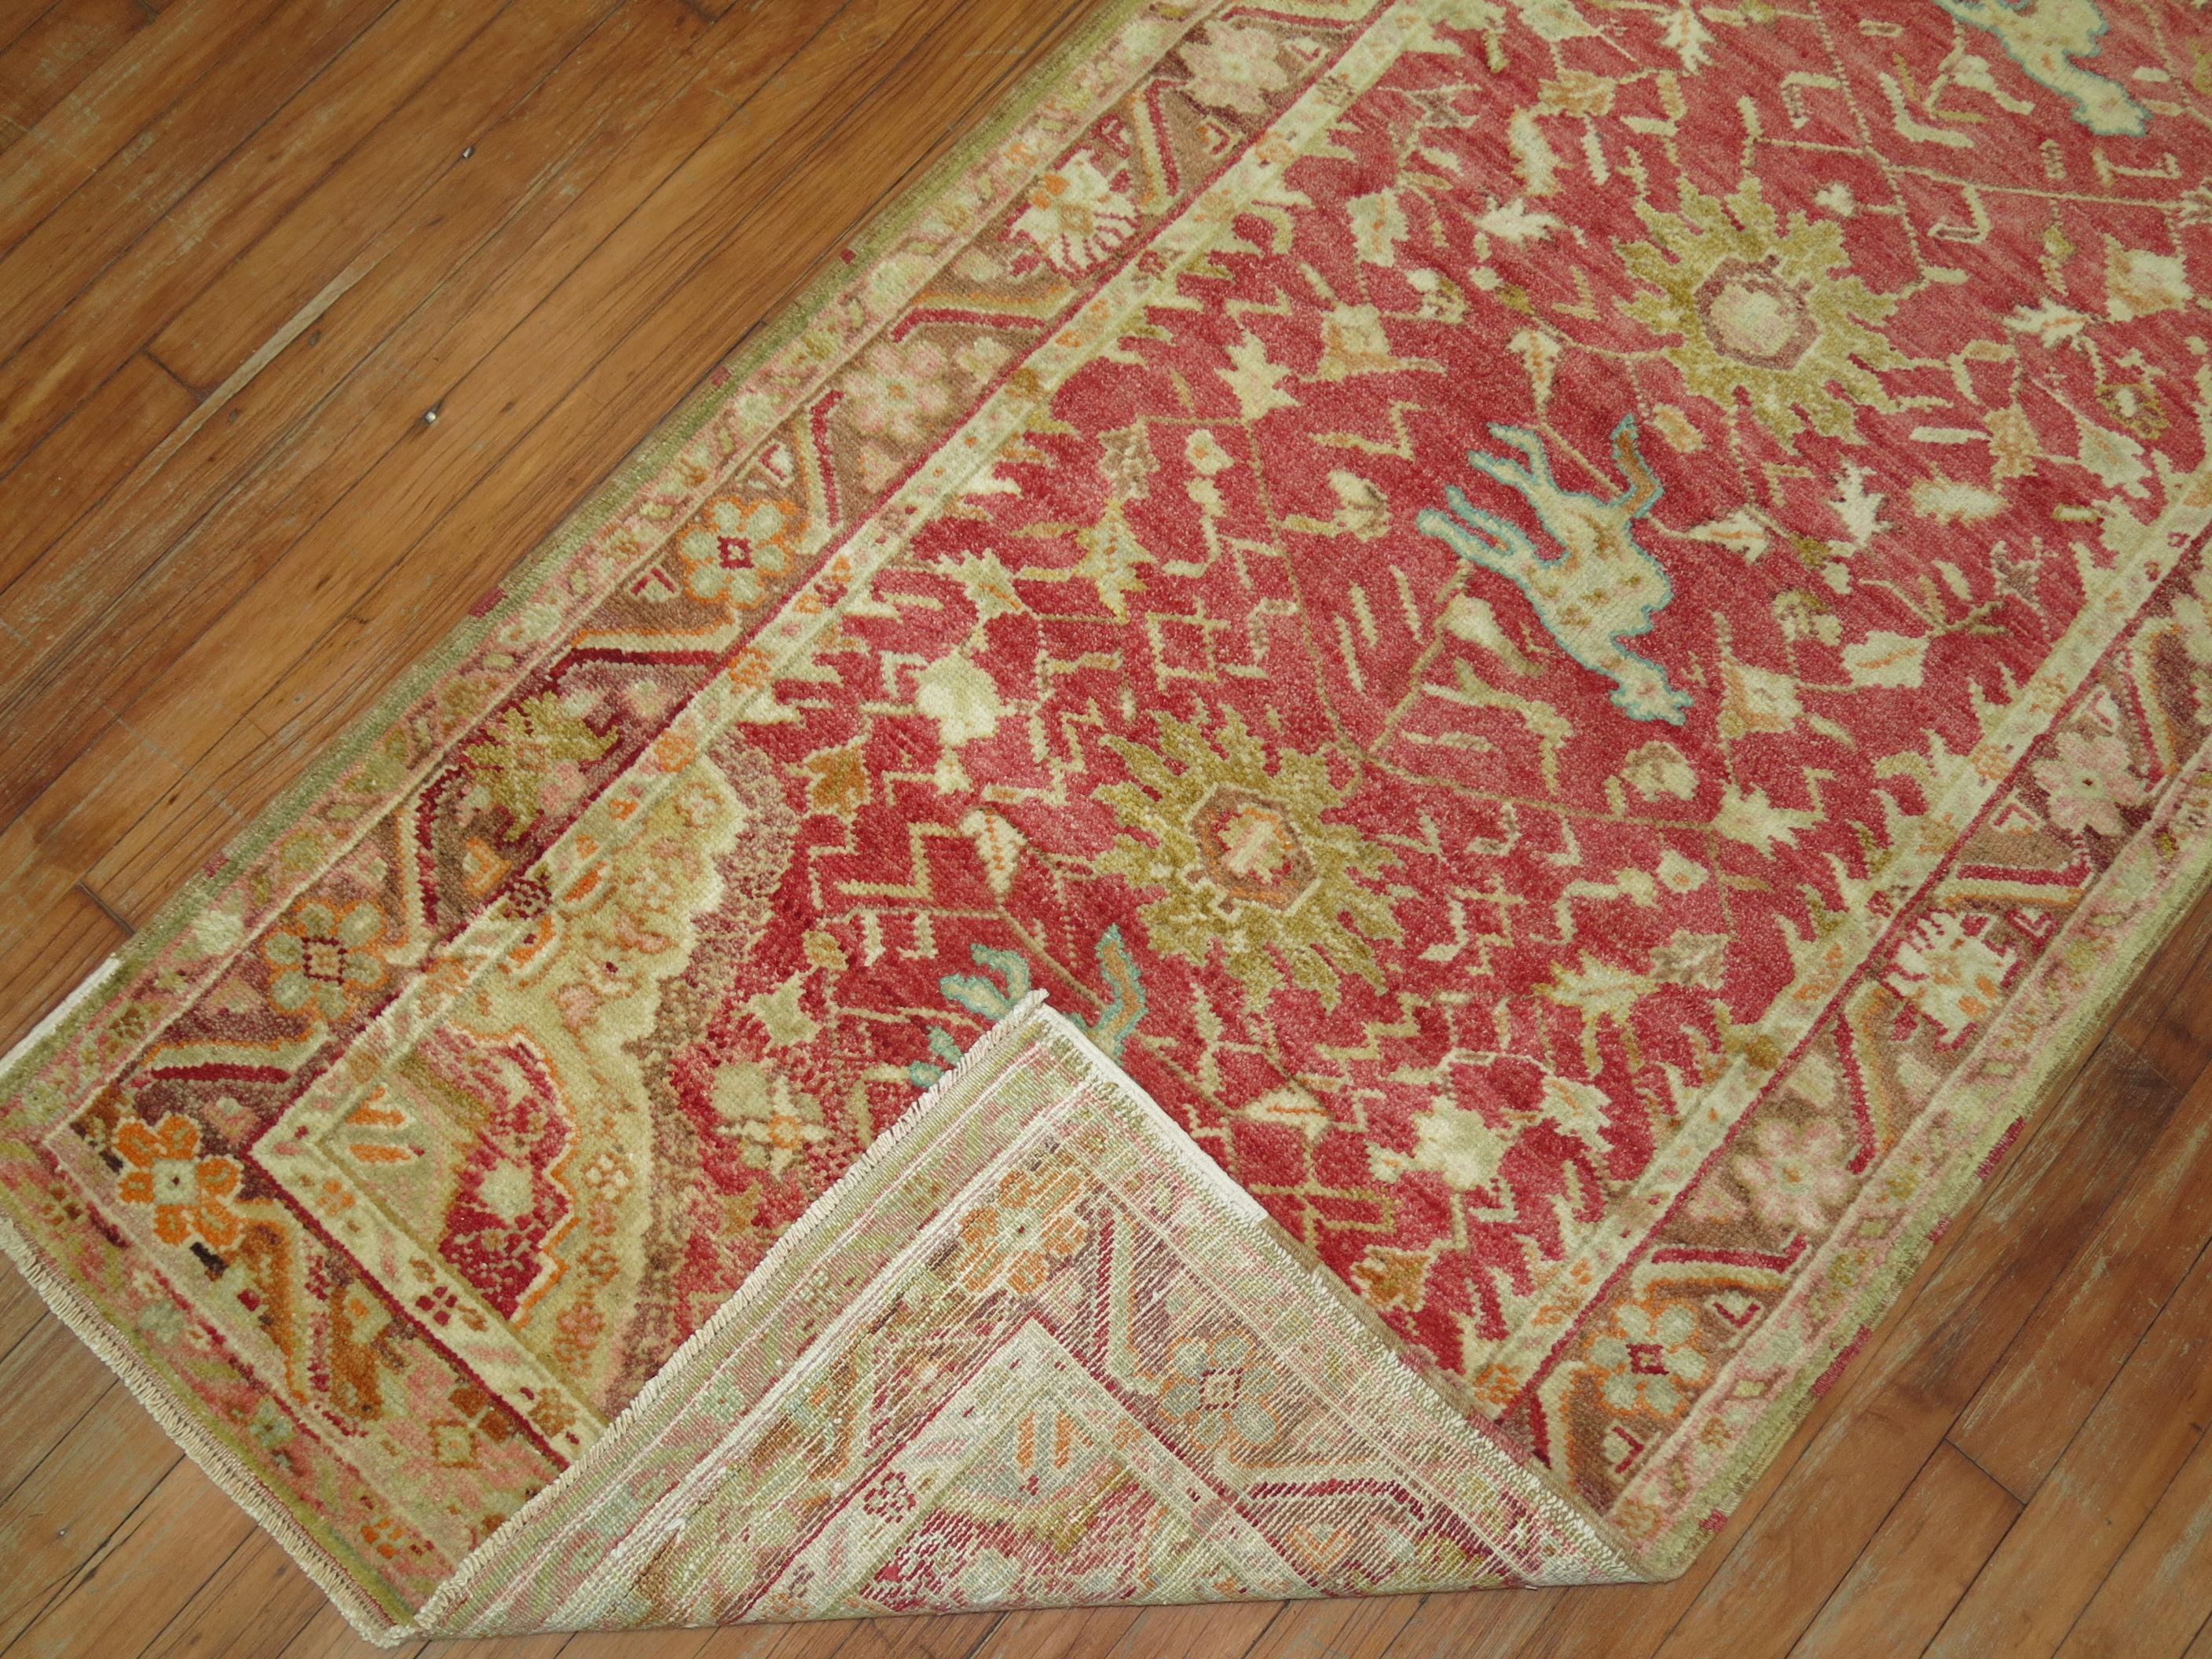 A decorative turkish runner with animals outlined in light blue floating around on a red field. 

Measures: 3' x 11'5''.